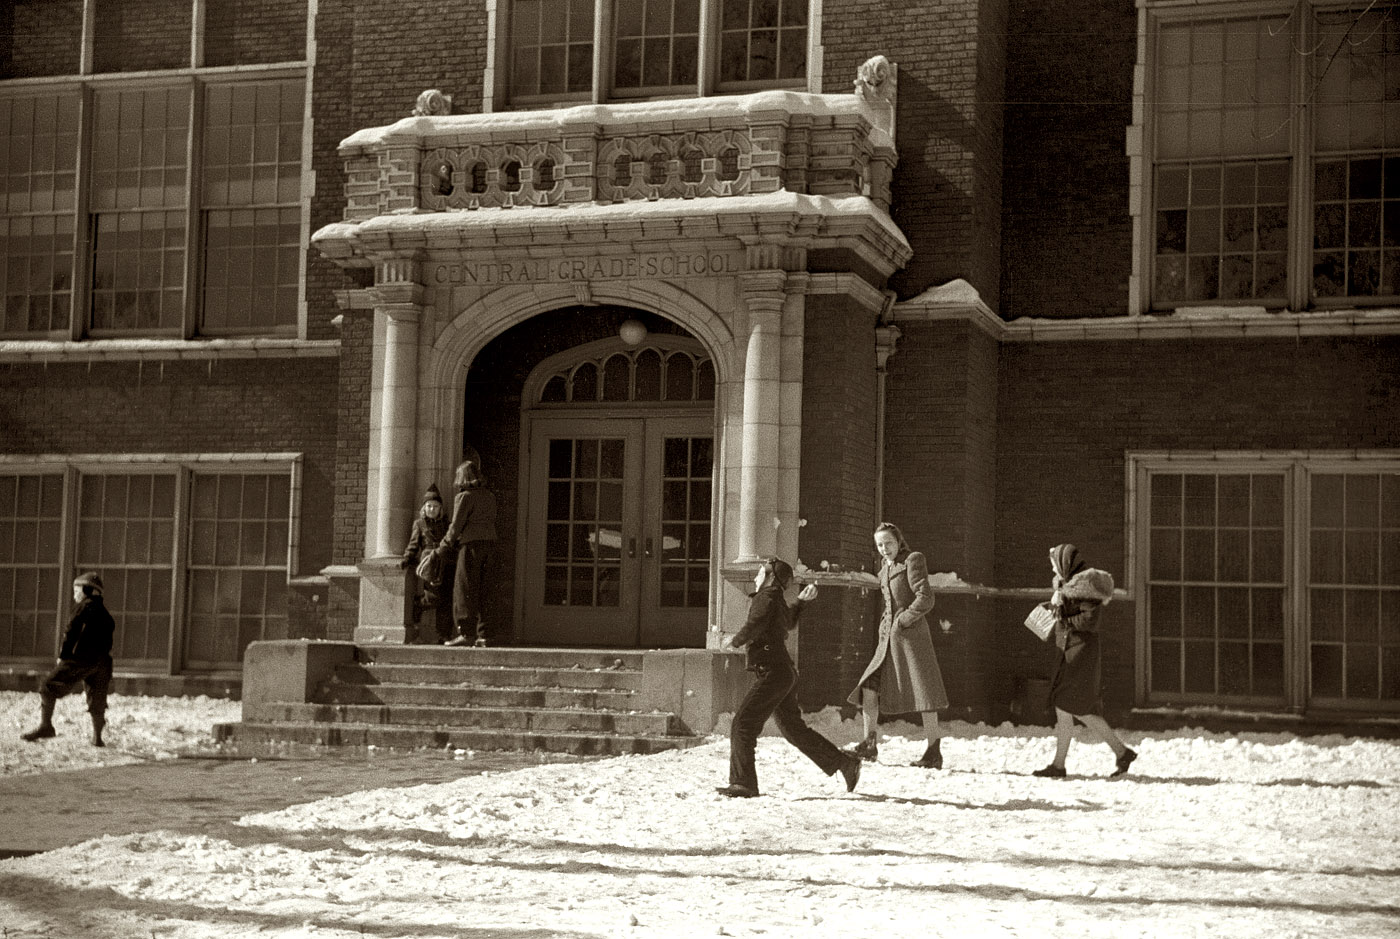 February 1940. The snowballs fly at Central Grade School in Chillicothe, Ohio. View full size. 35mm nitrate negative by Arthur Rothstein for the FSA.